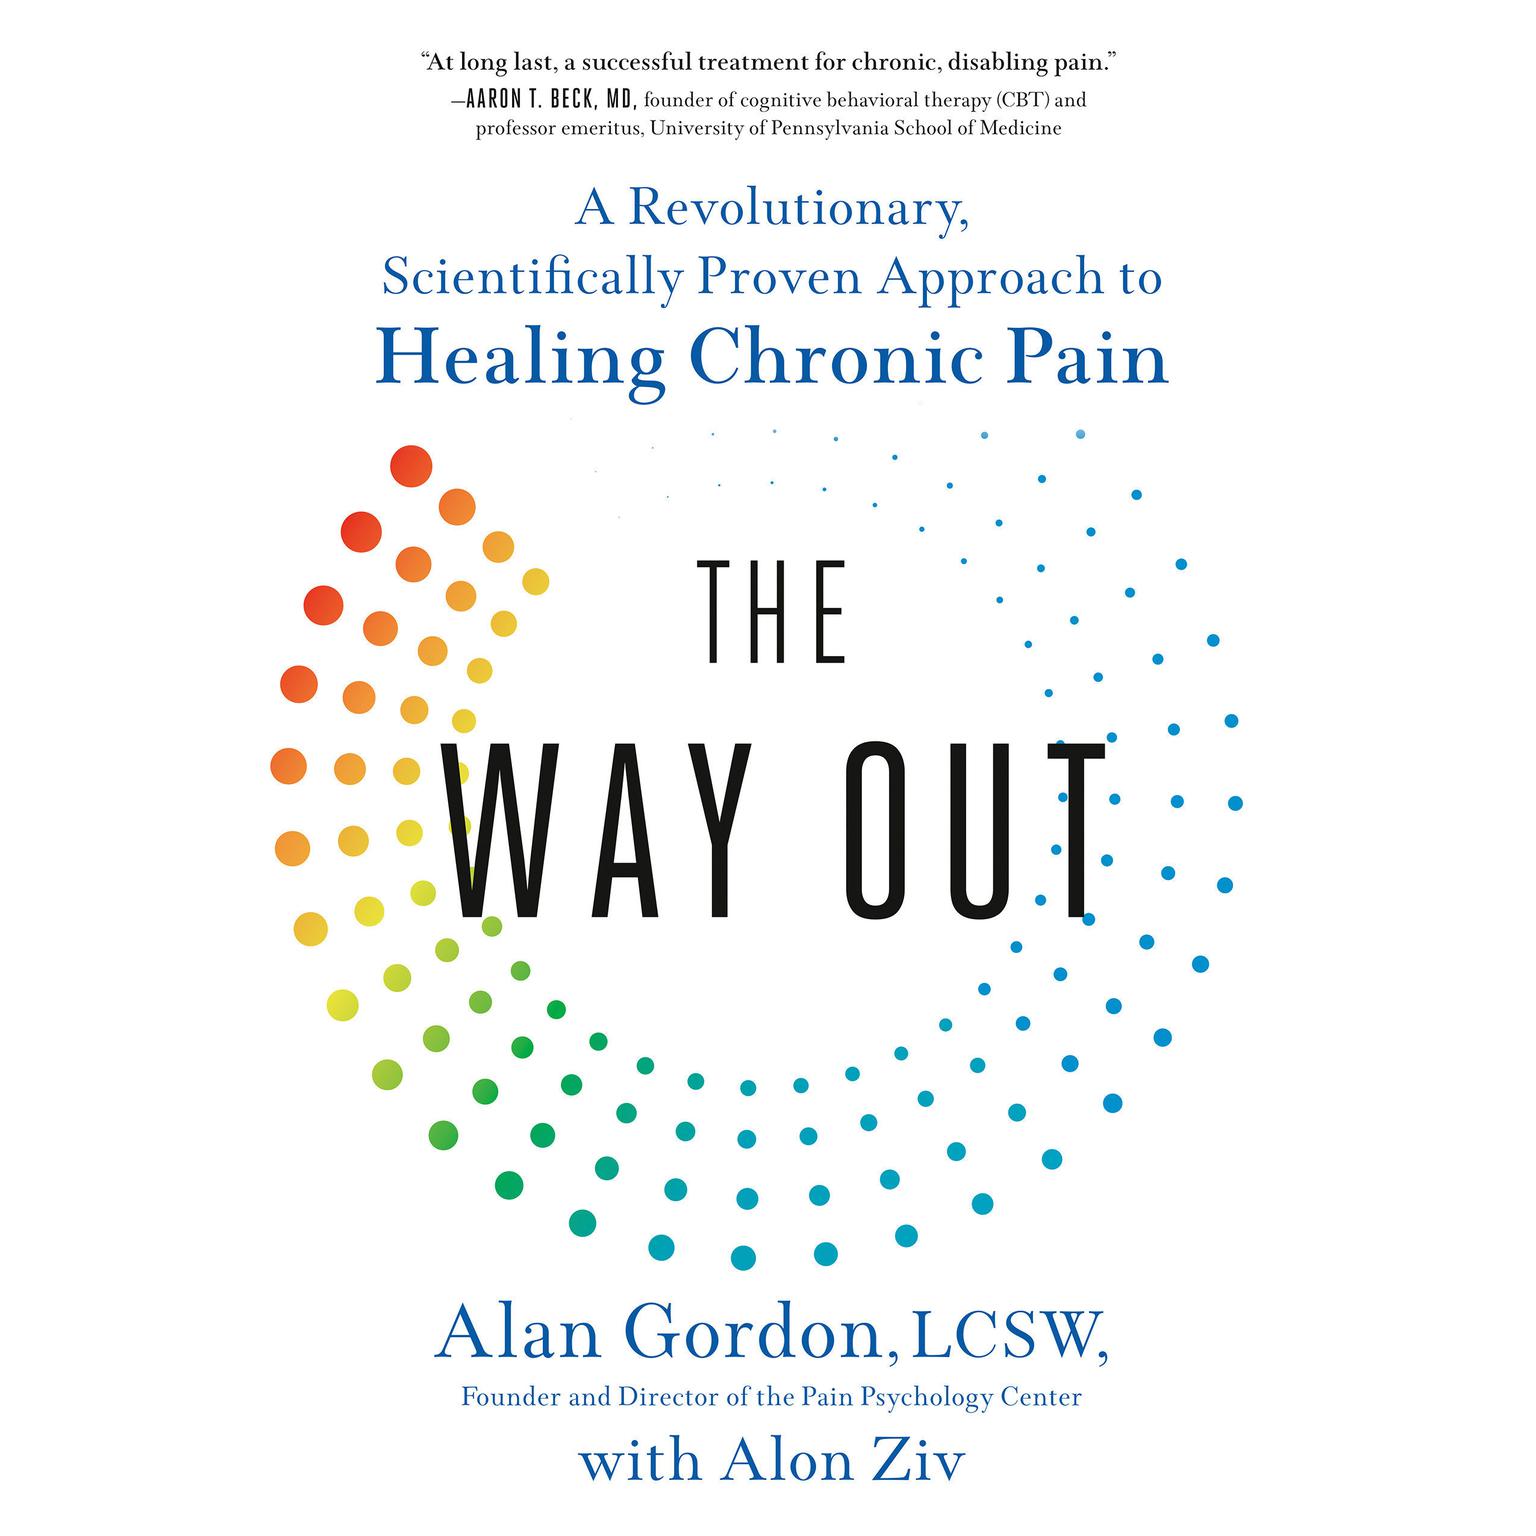 The Way Out: A Revolutionary, Scientifically Proven Approach to Healing Chronic Pain Audiobook, by Alan Gordon